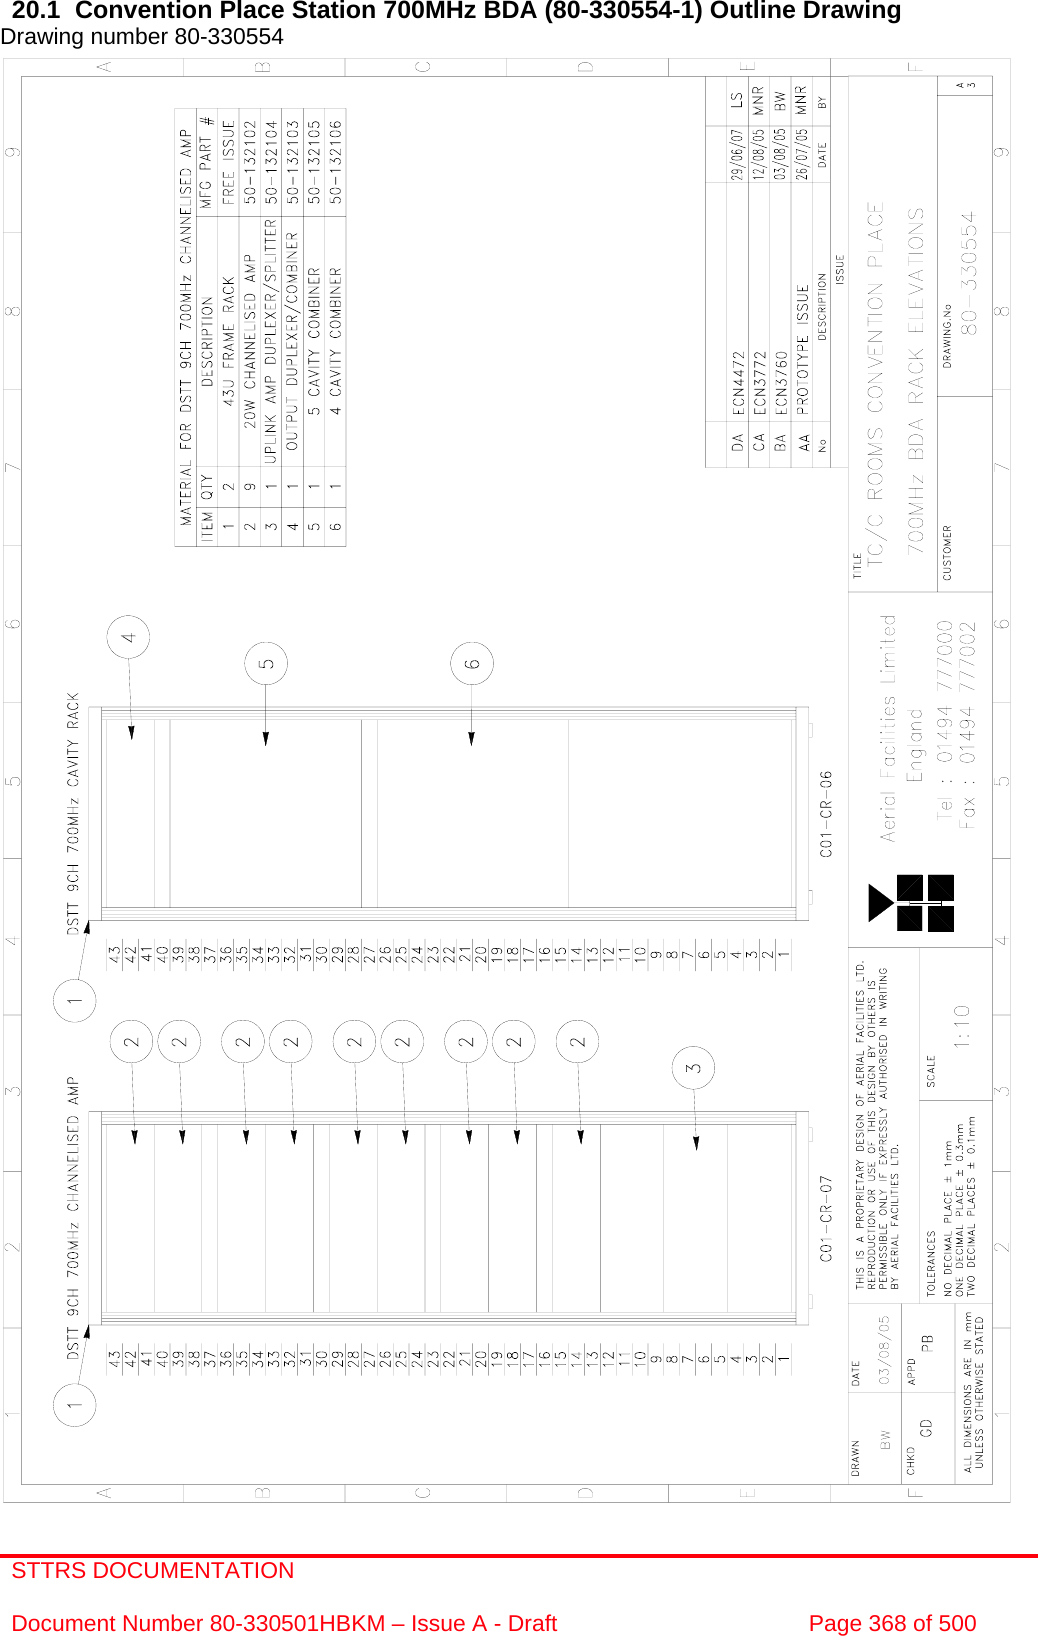 STTRS DOCUMENTATION  Document Number 80-330501HBKM – Issue A - Draft  Page 368 of 500   20.1  Convention Place Station 700MHz BDA (80-330554-1) Outline Drawing  Drawing number 80-330554                                                       